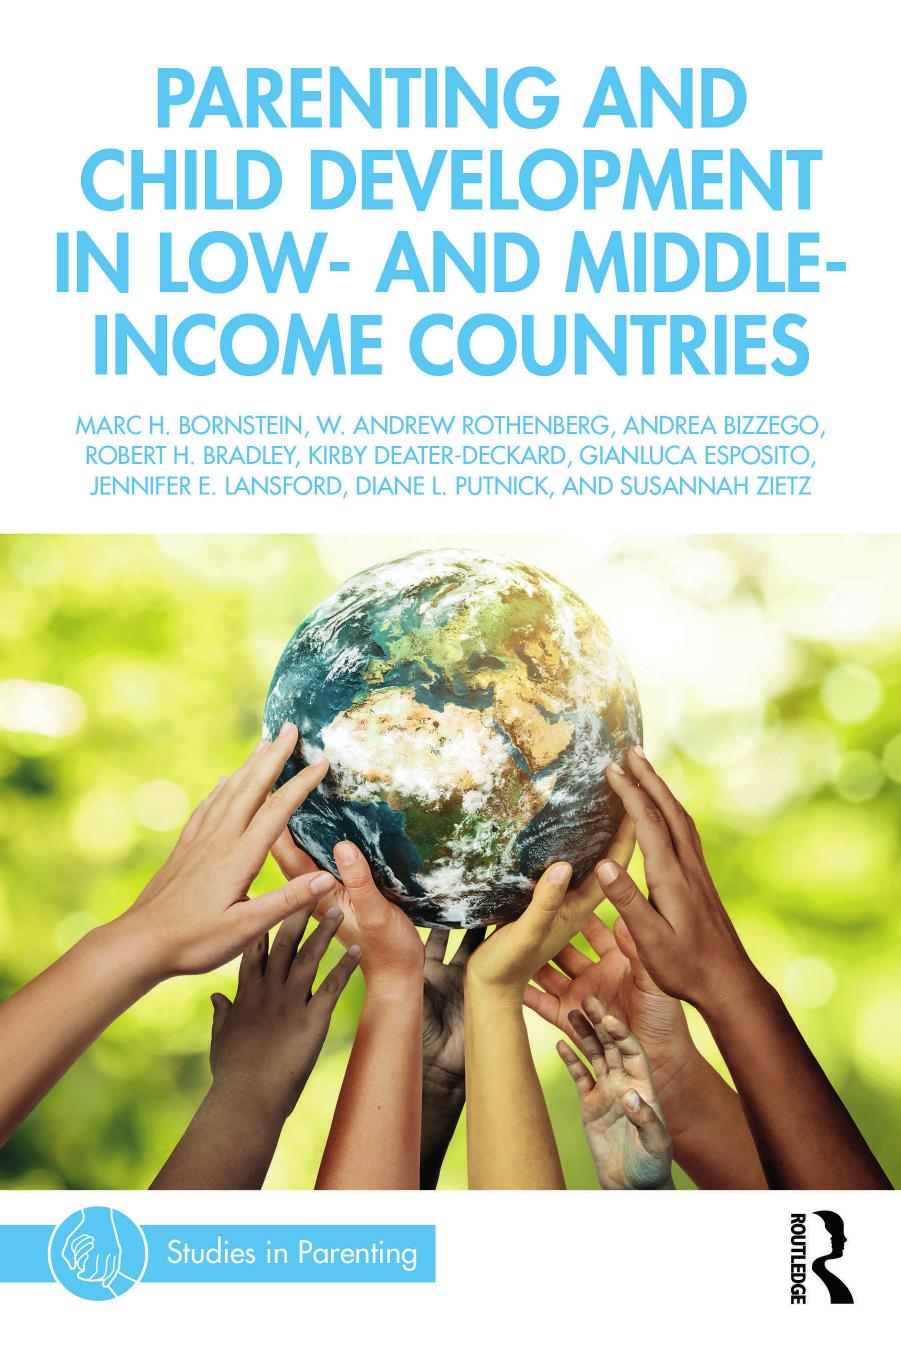 Parenting and Child Development in Low- and Middle-Income Countries by unknow